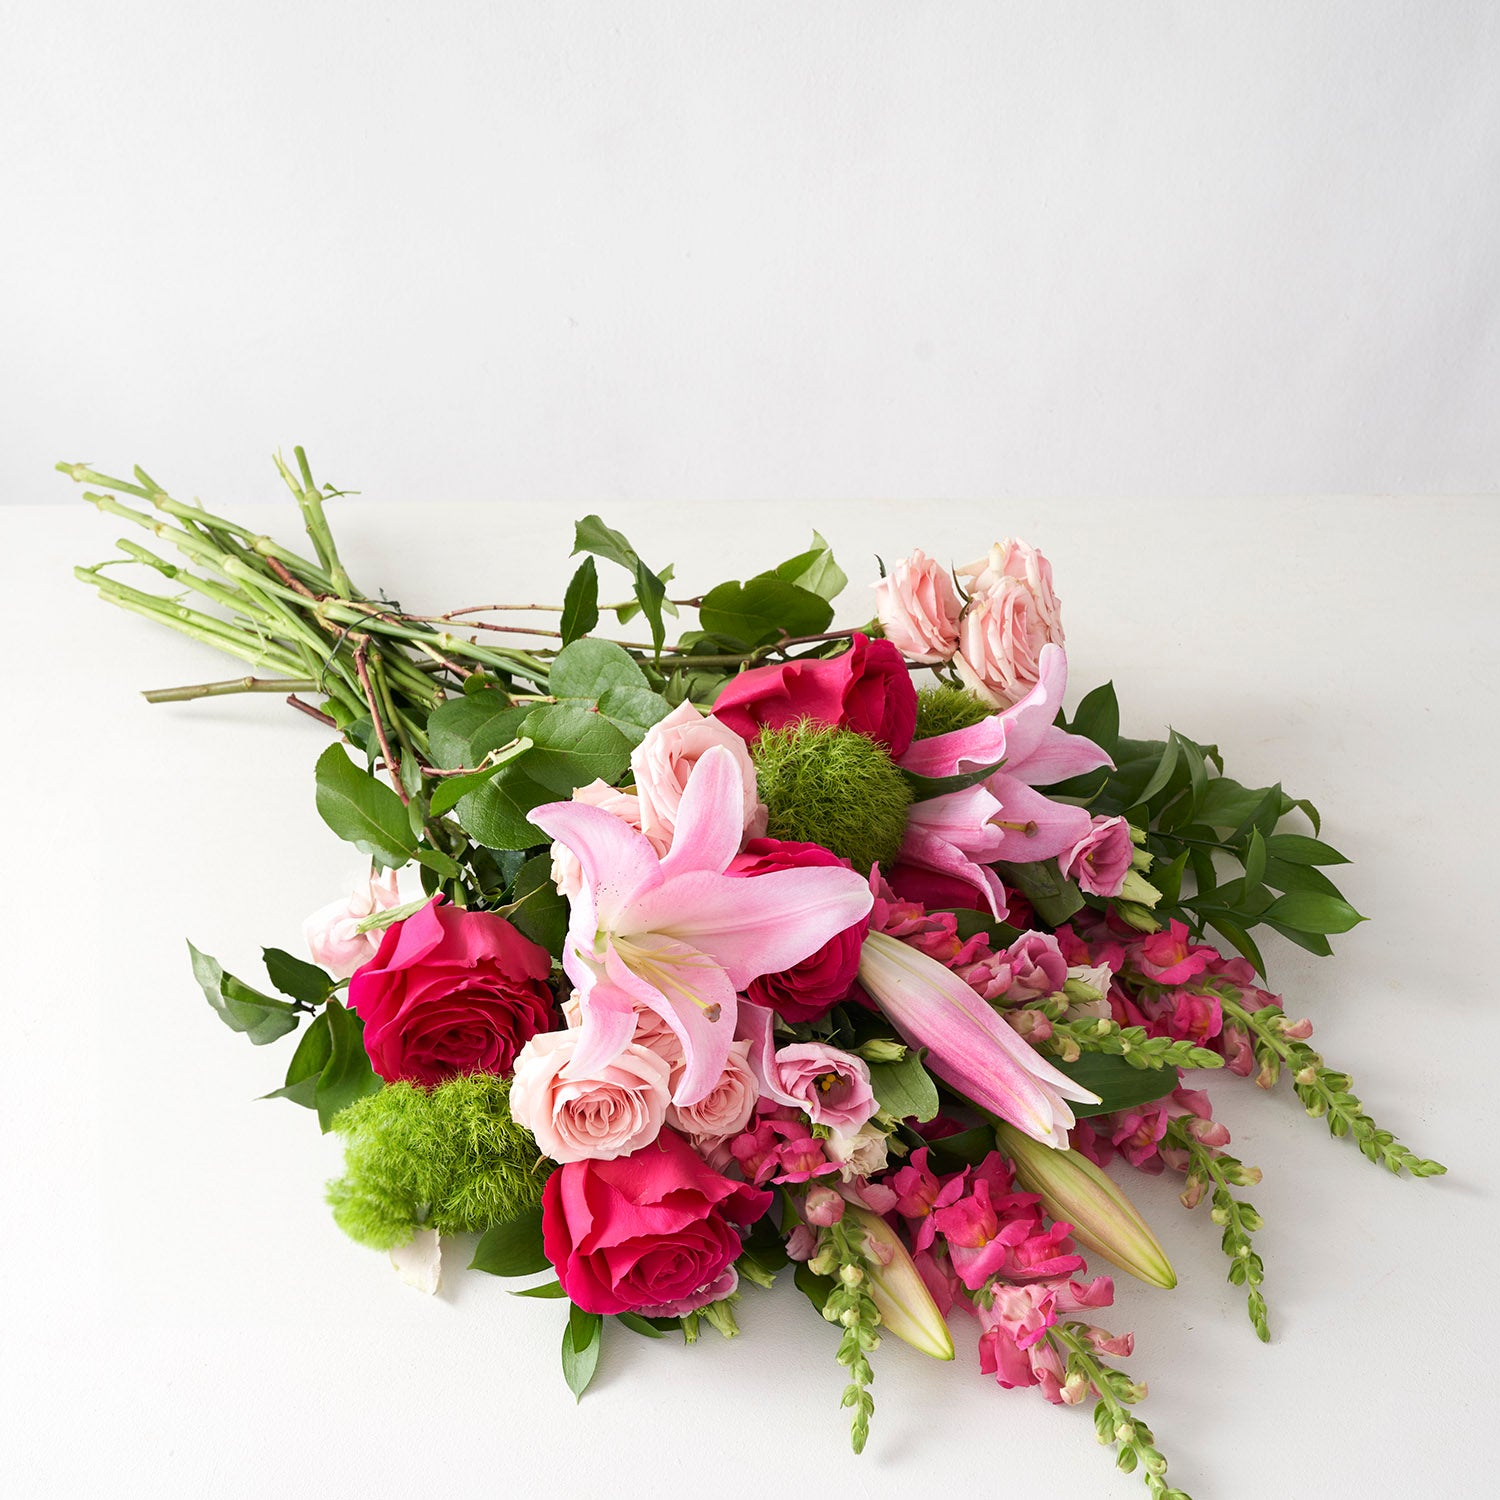 Bouquet of pink flowers including snapdragon, lilies, and roses on white background.